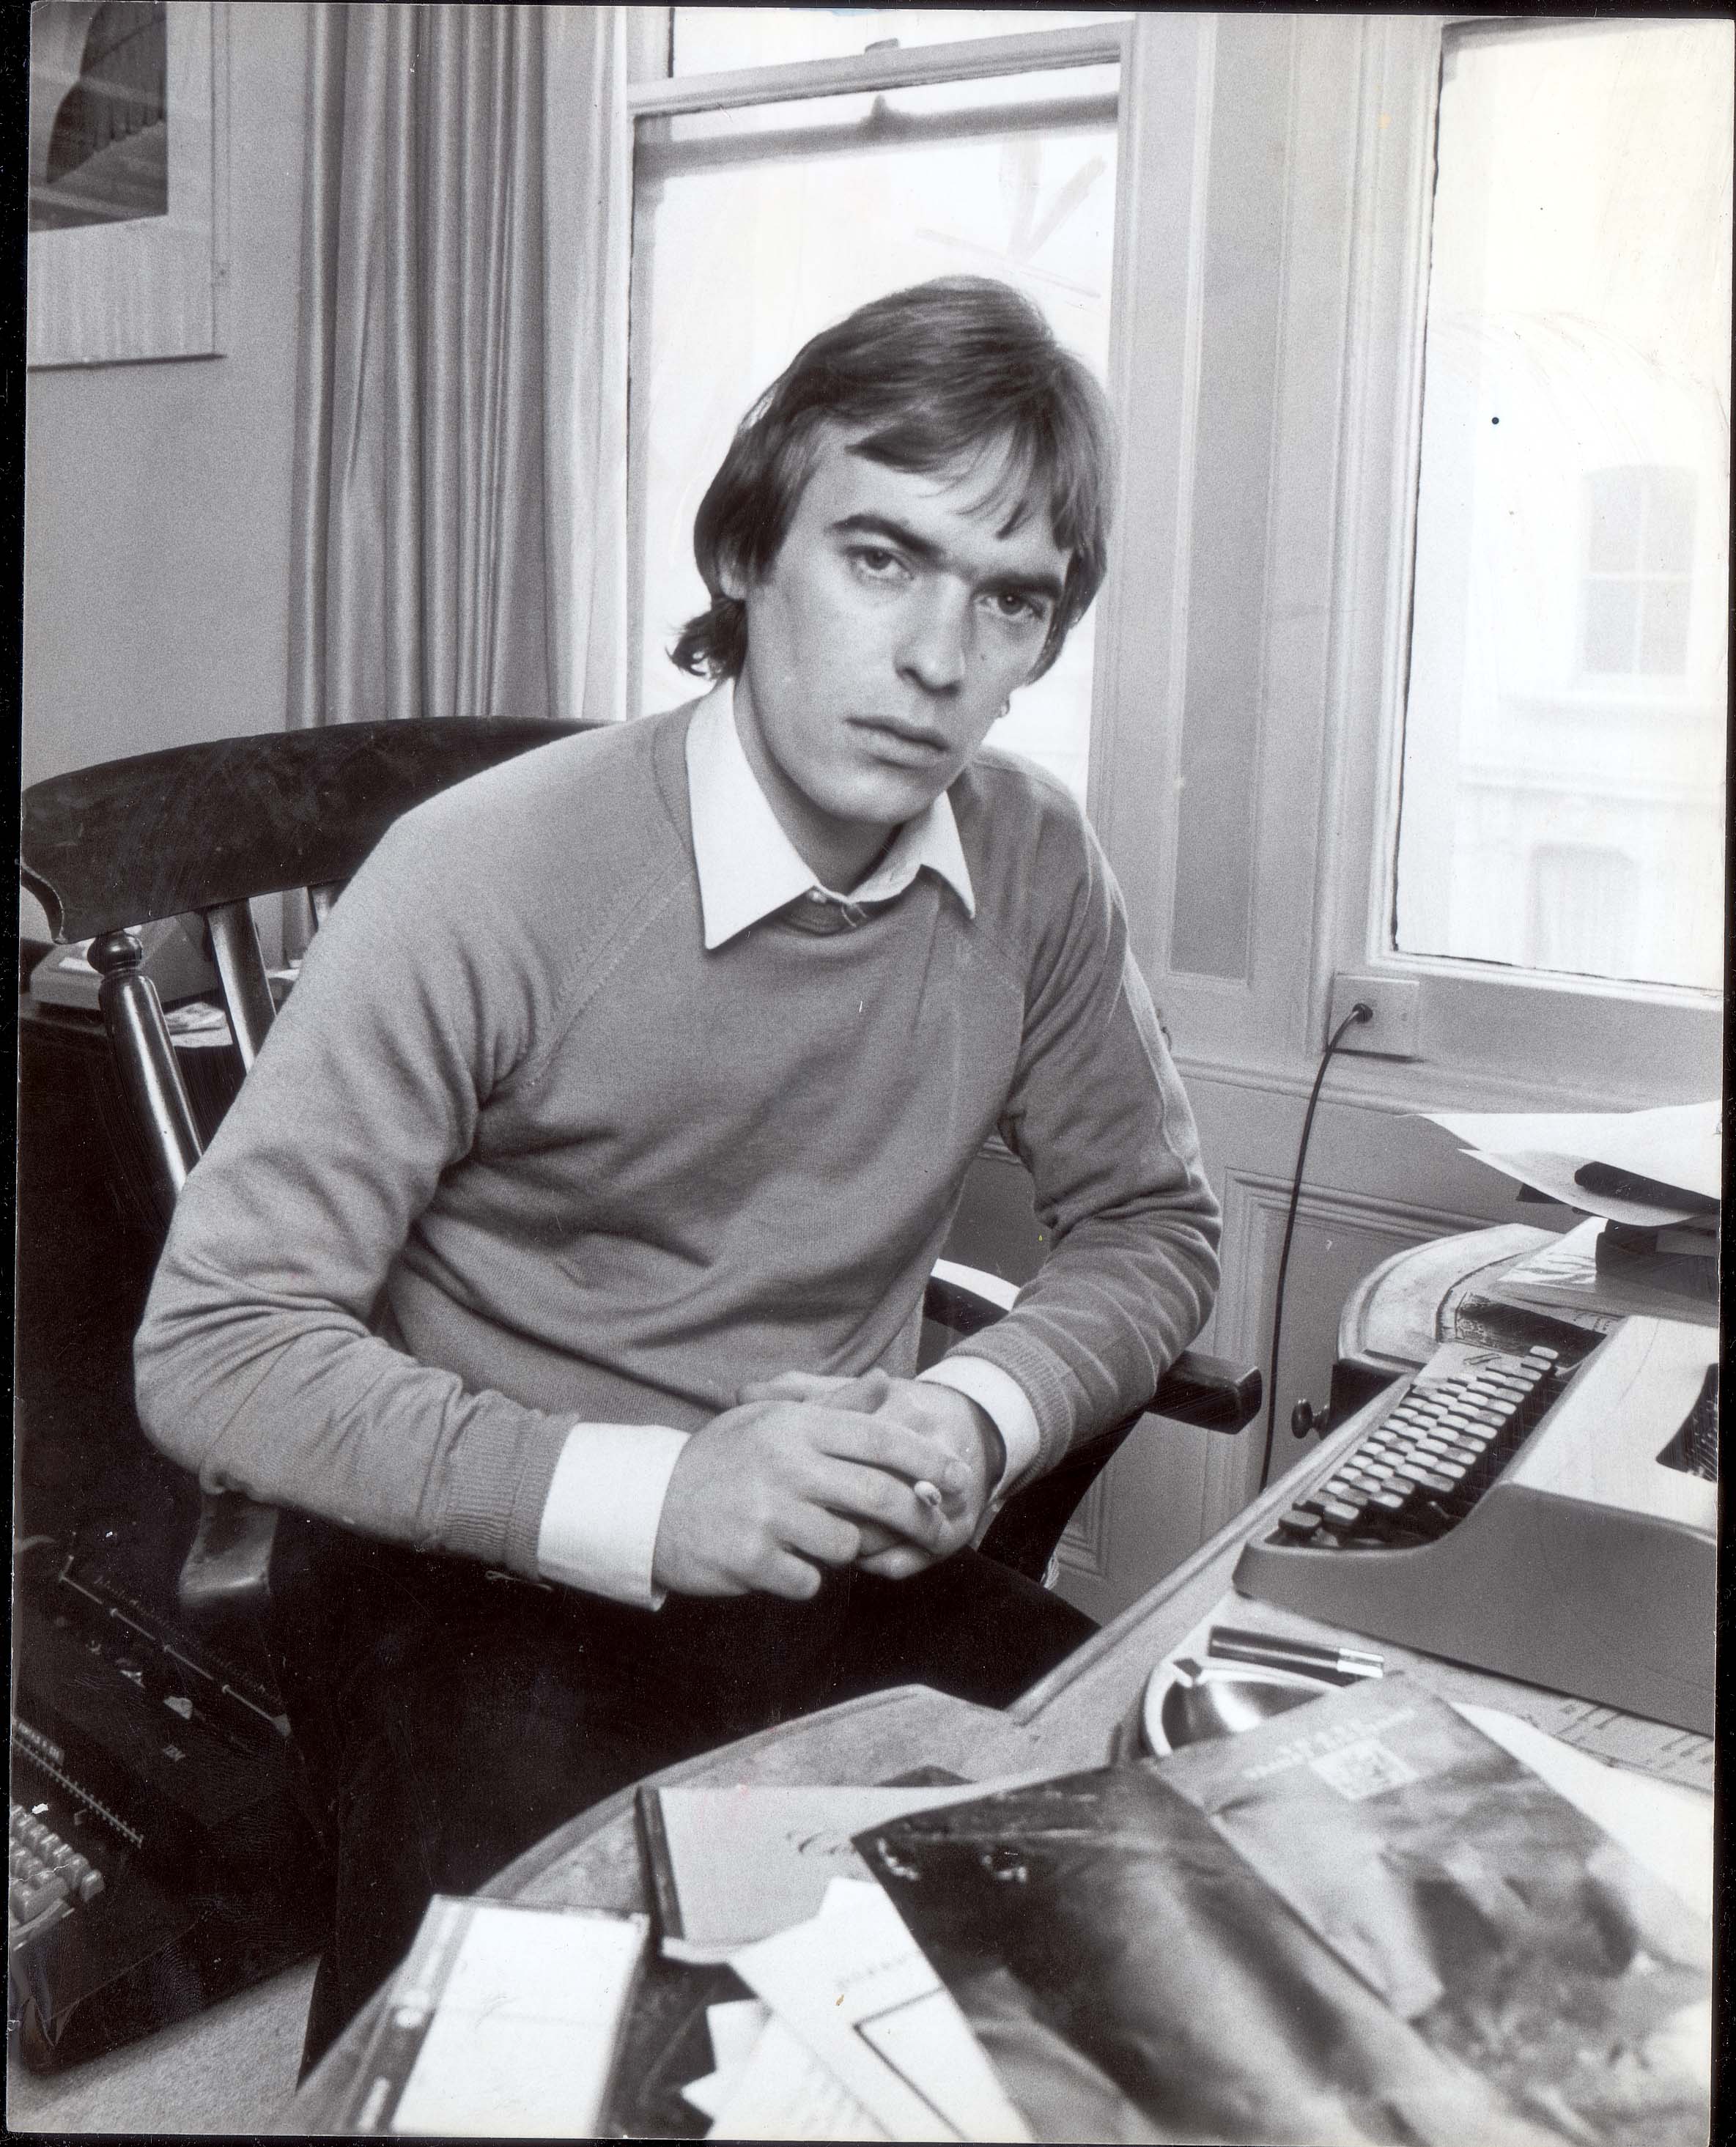 Amis at his writing desk in London, 1981